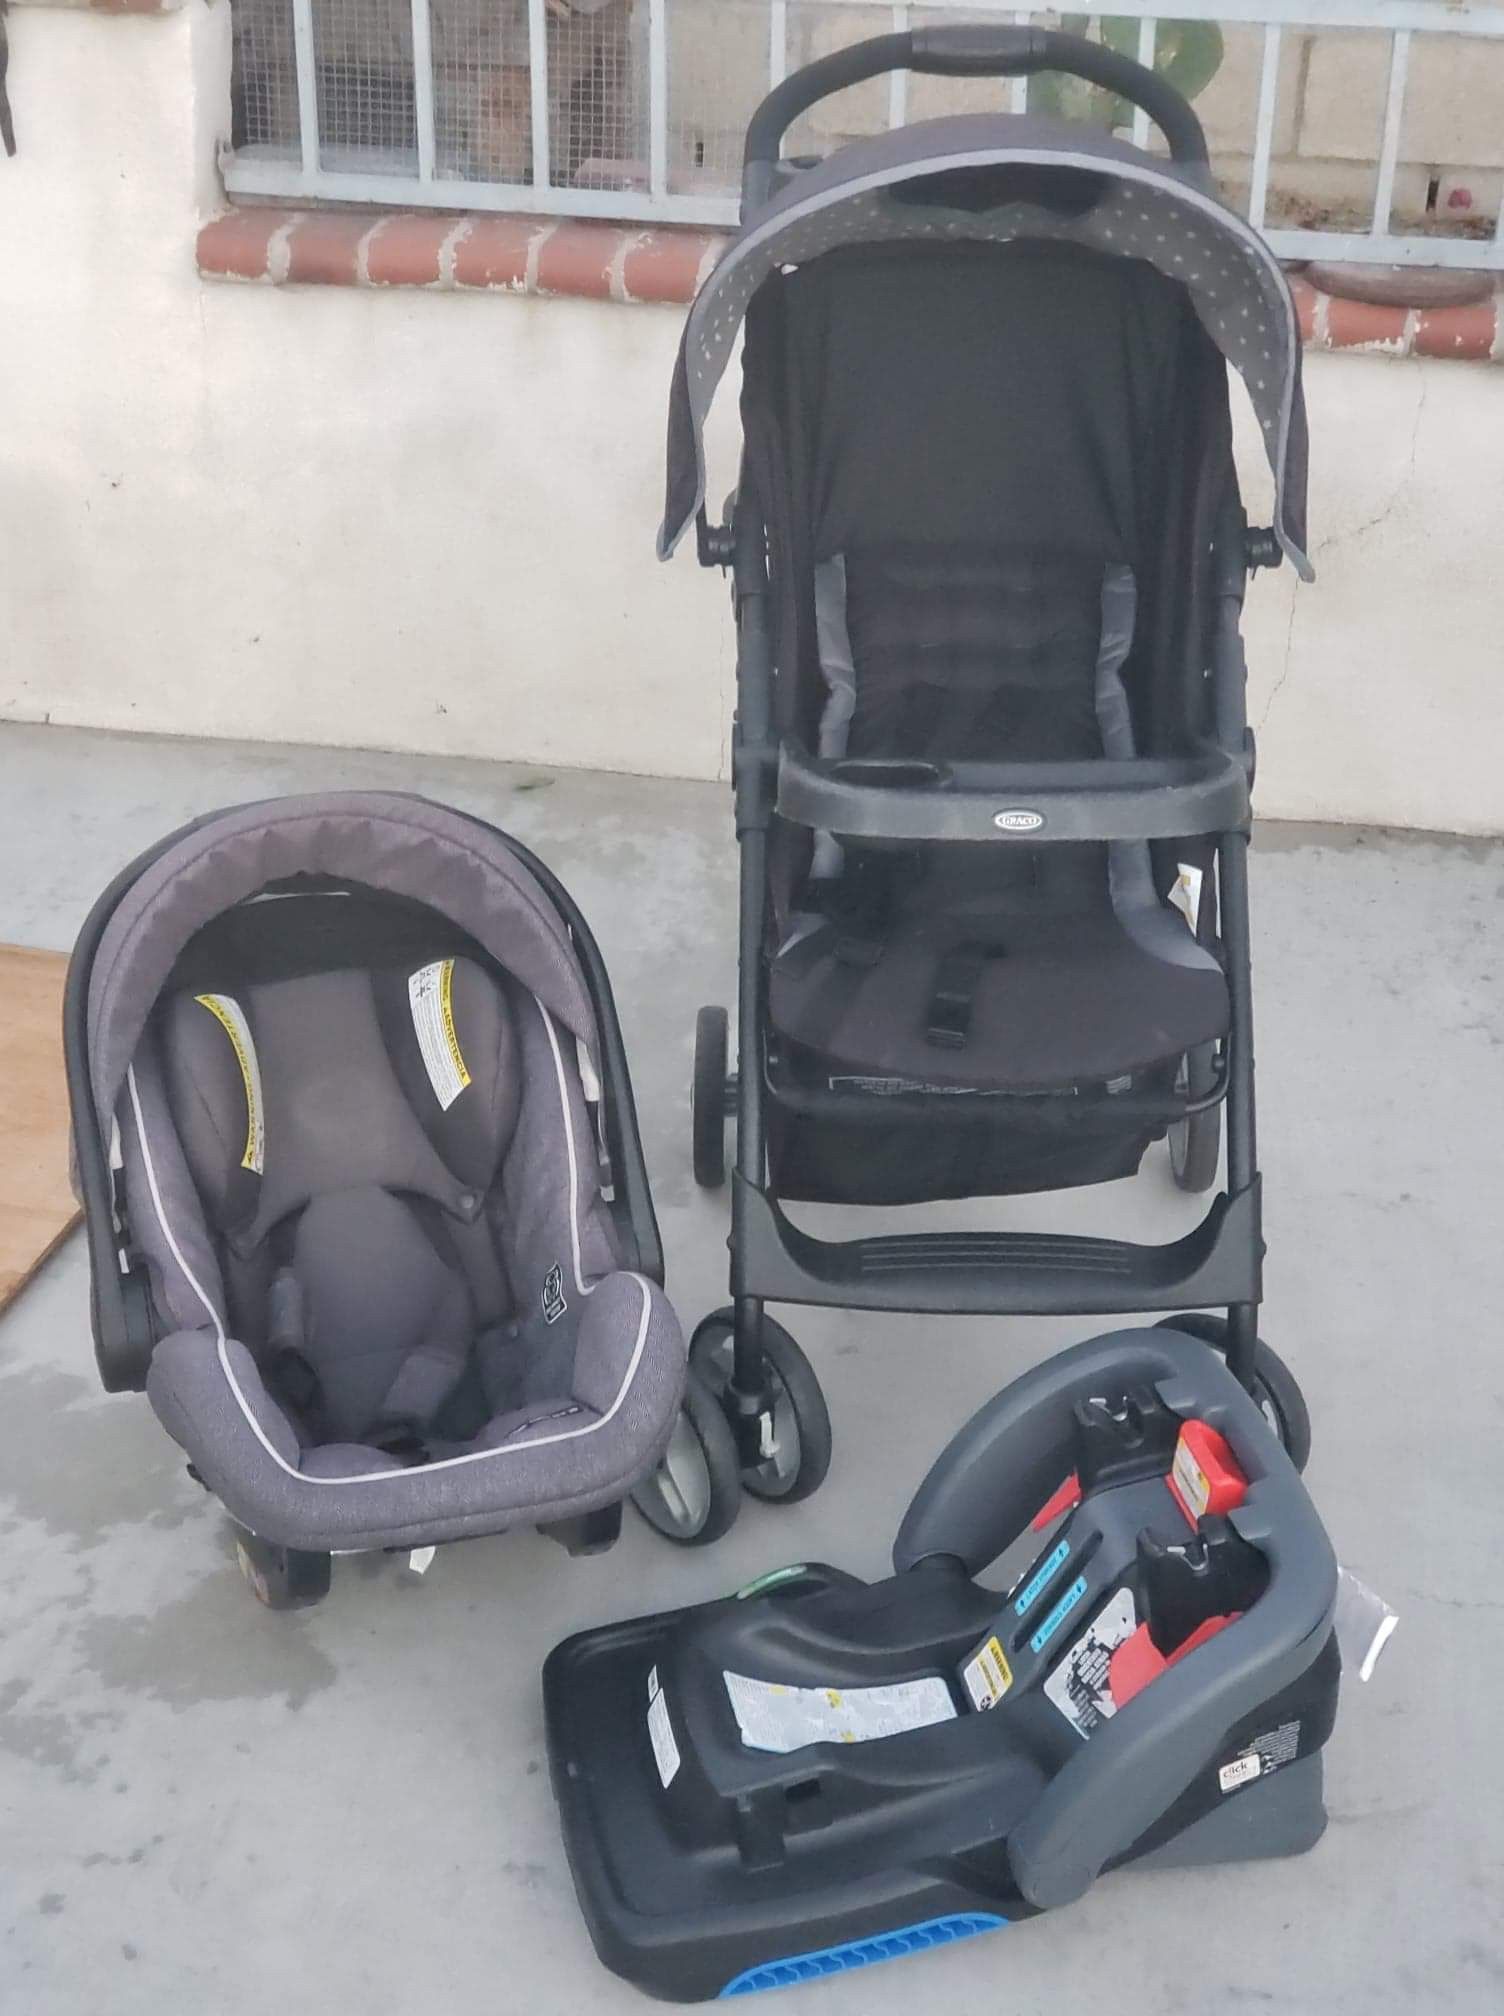 Graco stroller with baby seat and base easy to remove